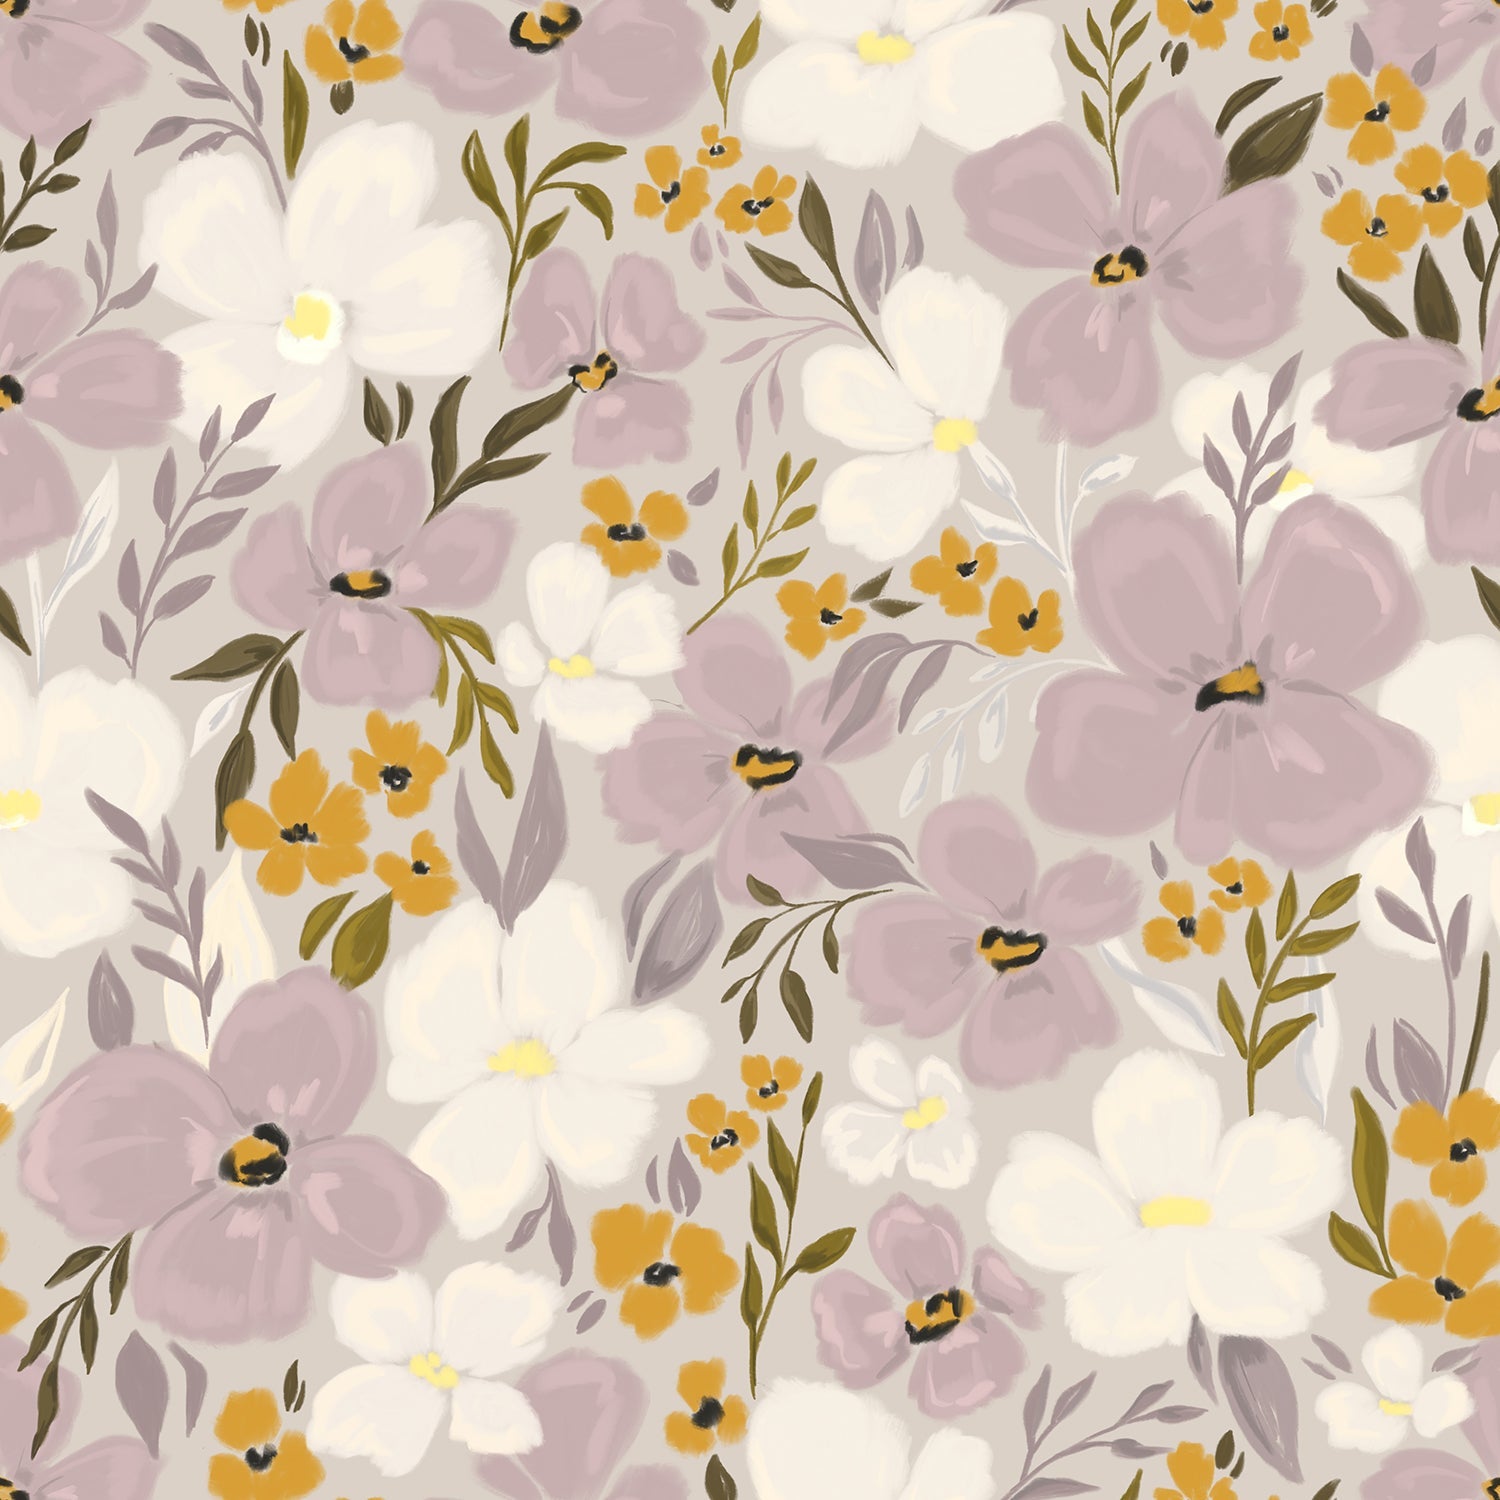 A delicate floral wallpaper design featuring an array of soft purple and white flowers interspersed with tiny yellow blossoms and dark green leaves, set against a light gray background. The design evokes a springtime garden, with large blooms prominently placed, creating a soothing and inviting atmosphere.